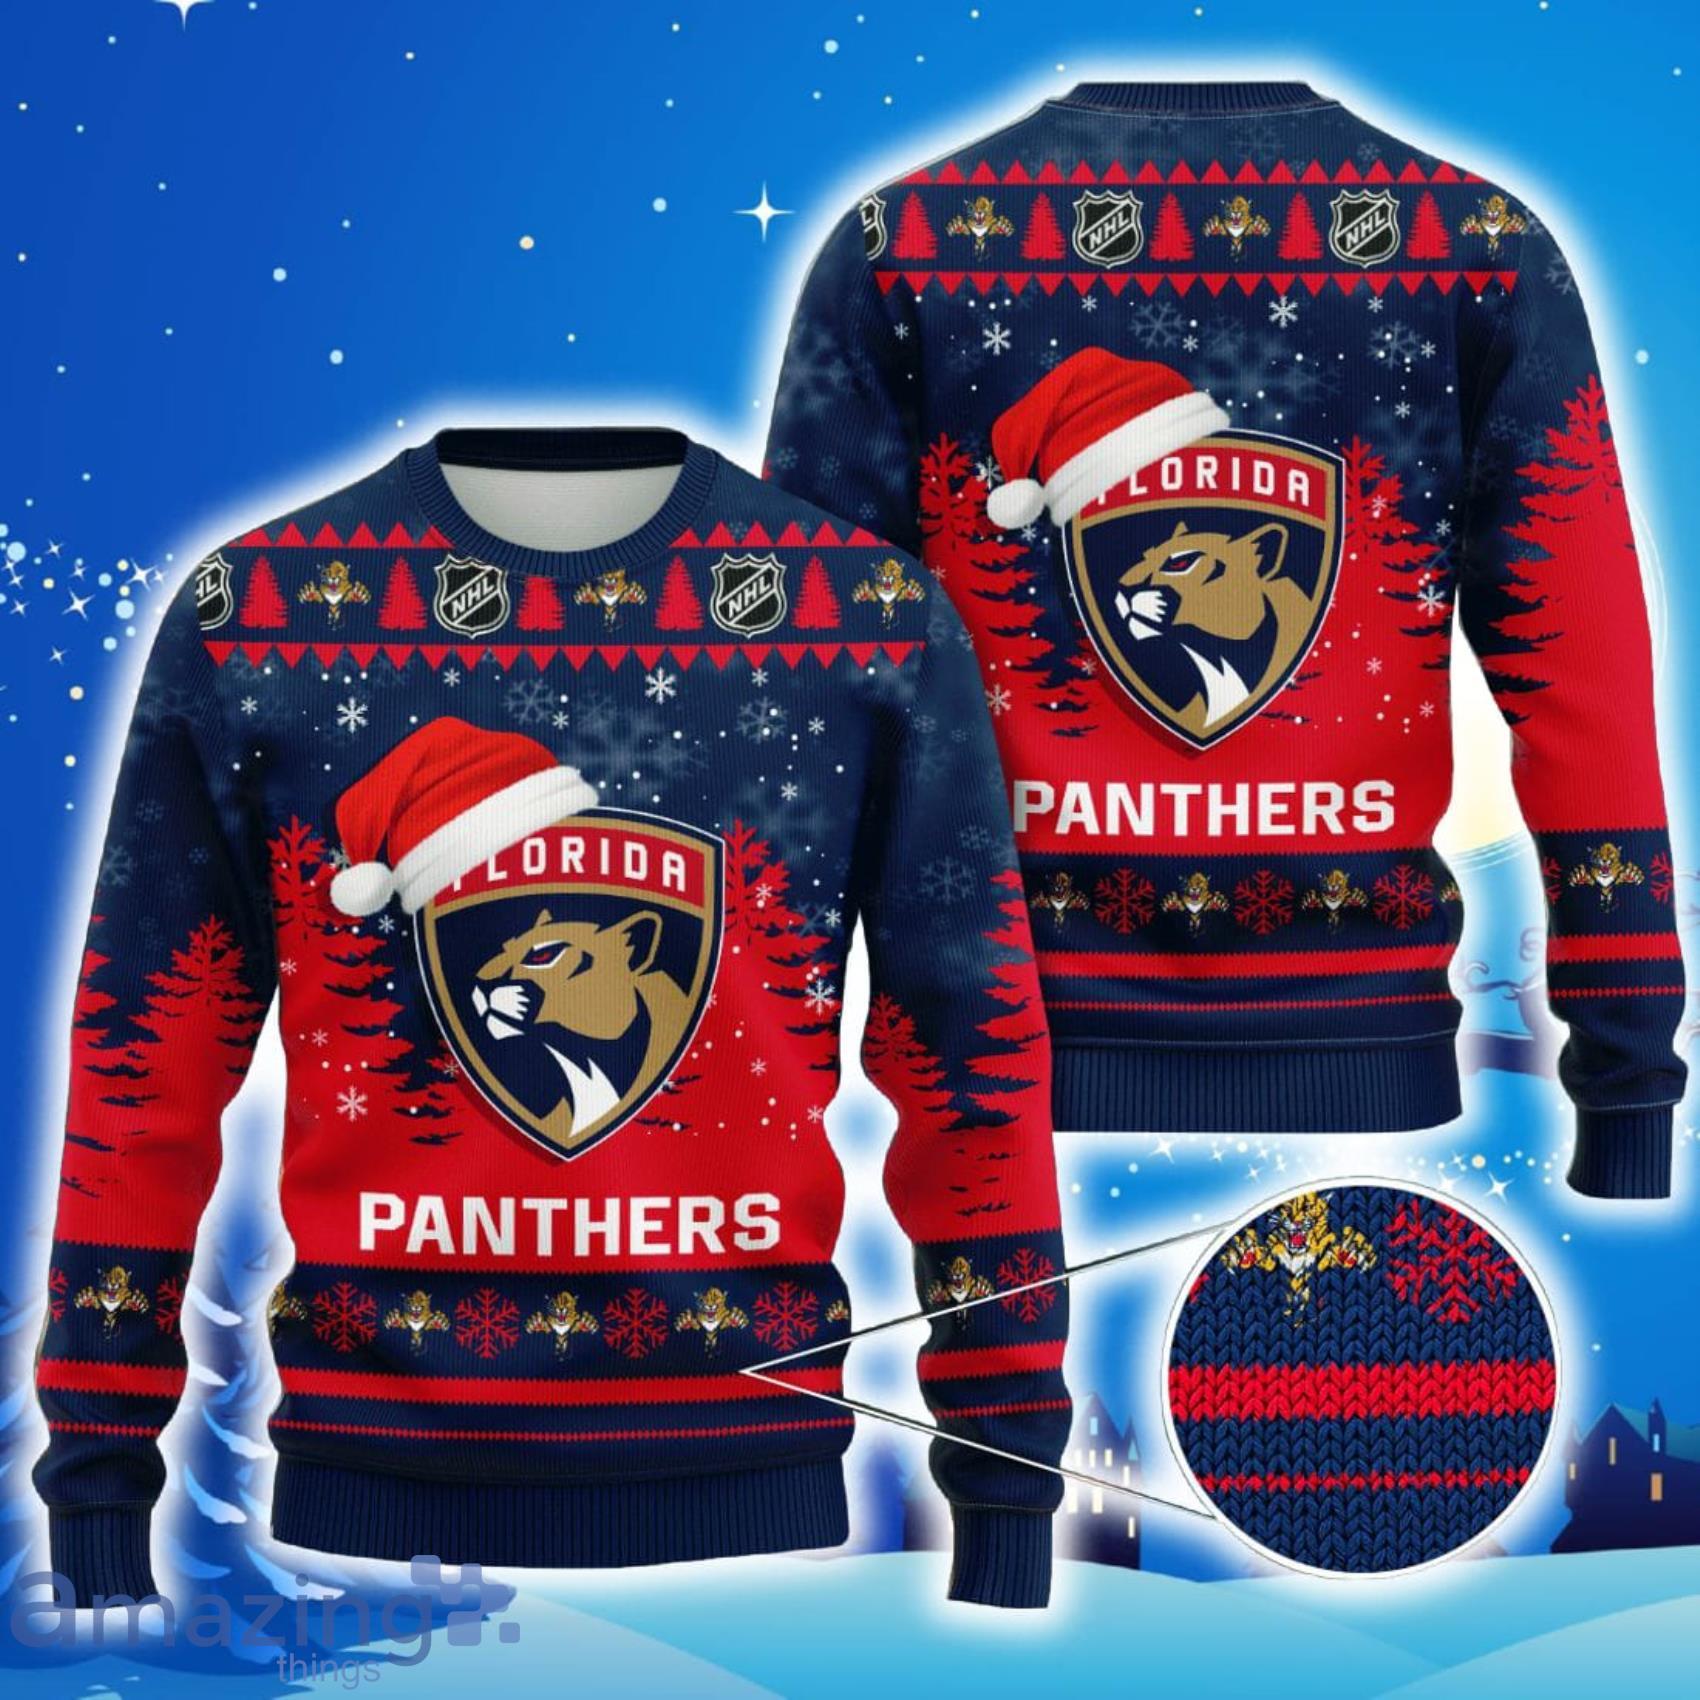 NHL Florida Panthers Christmas Ugly 3D Sweater For Men And Women Gift Ugly  Christmas - Banantees